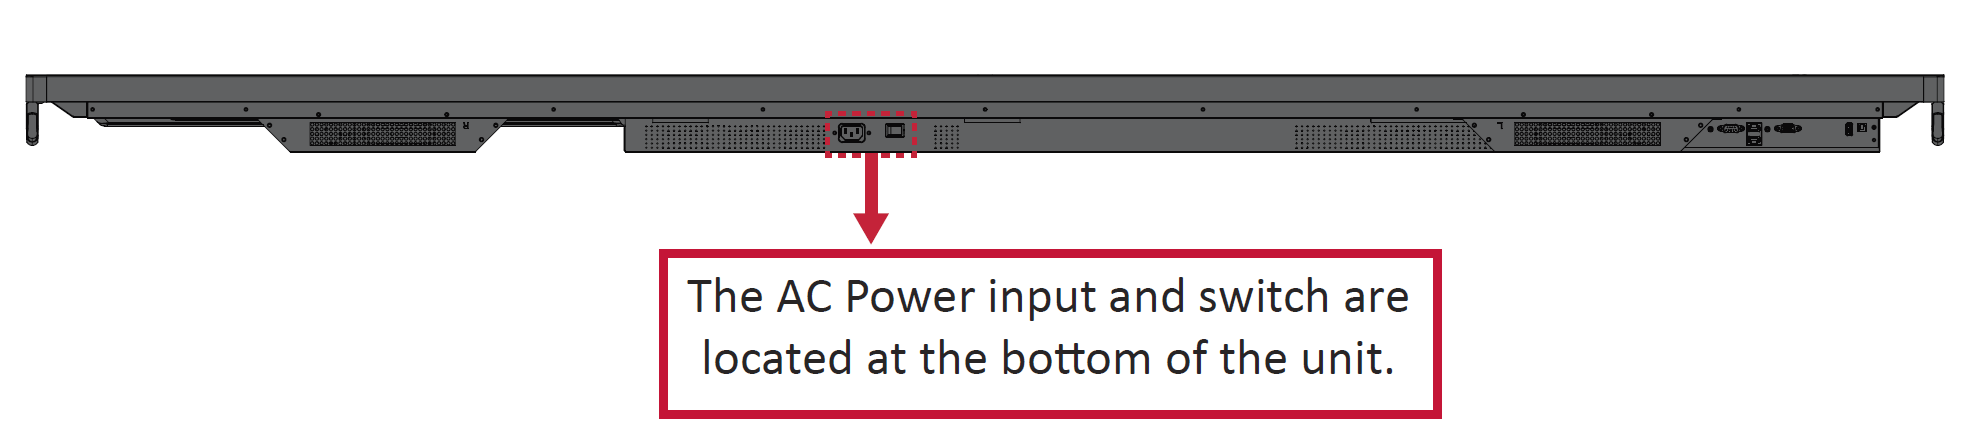 File:IFP9850-4 Power Switch.png